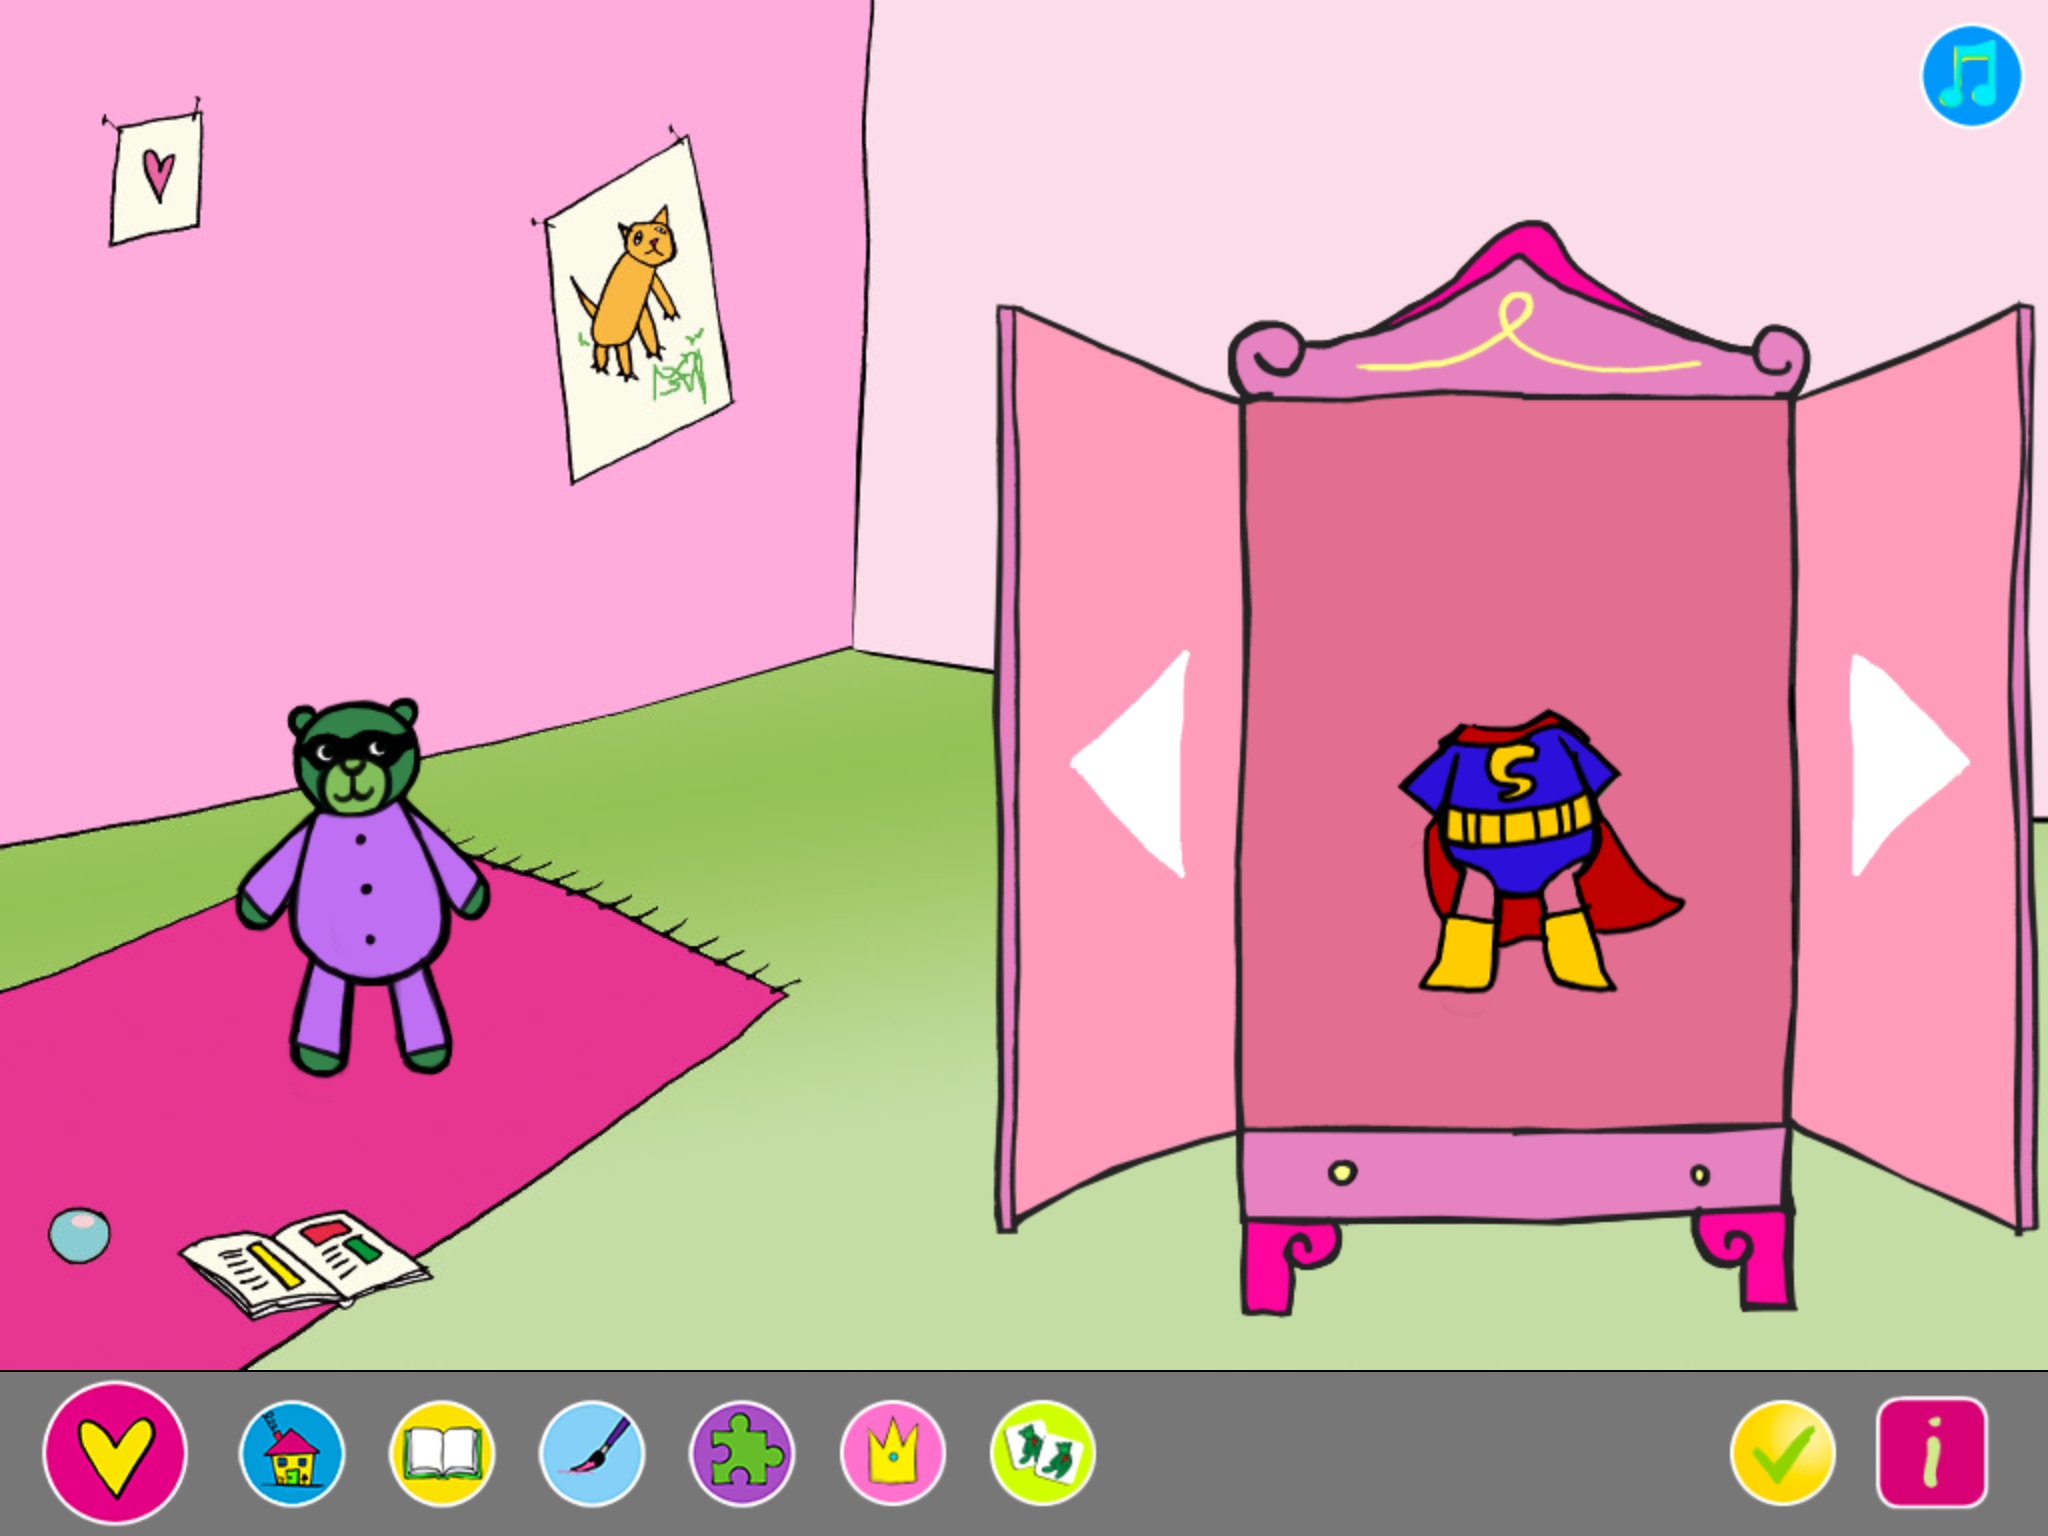 Millie & Teddy children's books - read, play and paint screenshot 3